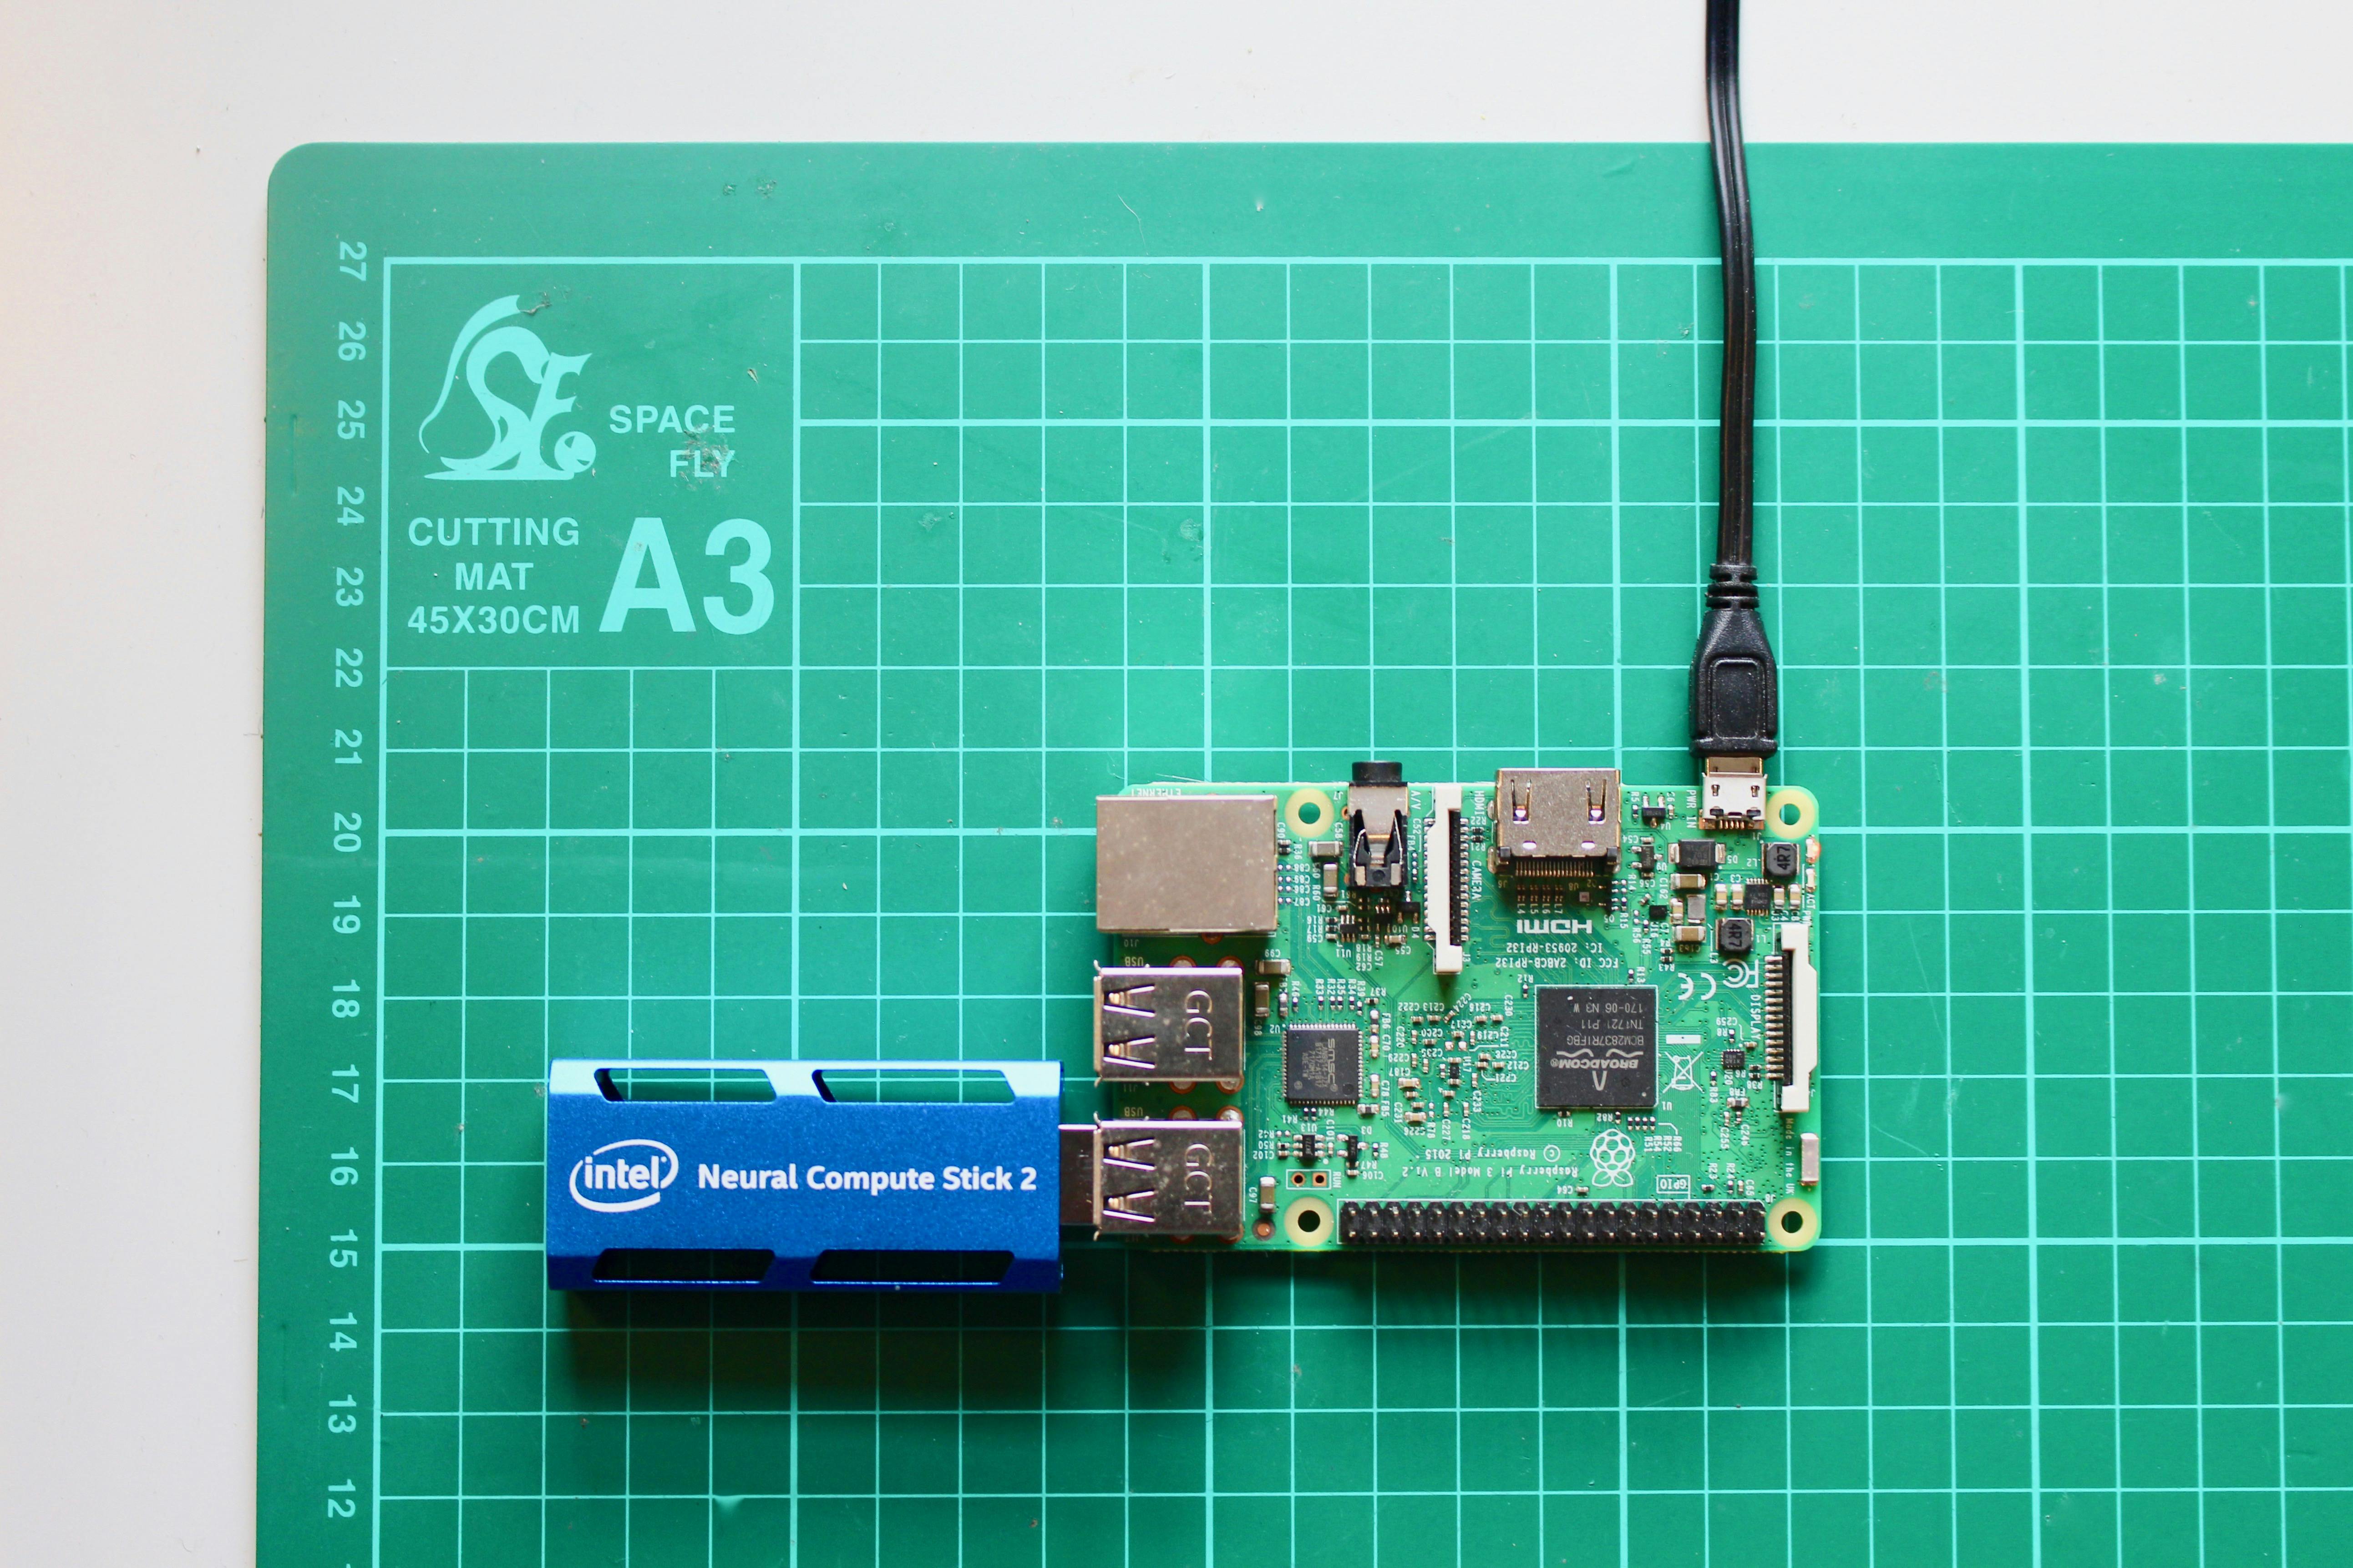 Refrein Trekker Vuilnisbak Getting Started with the Intel Neural Compute Stick 2 and the Raspberry Pi  - Hackster.io